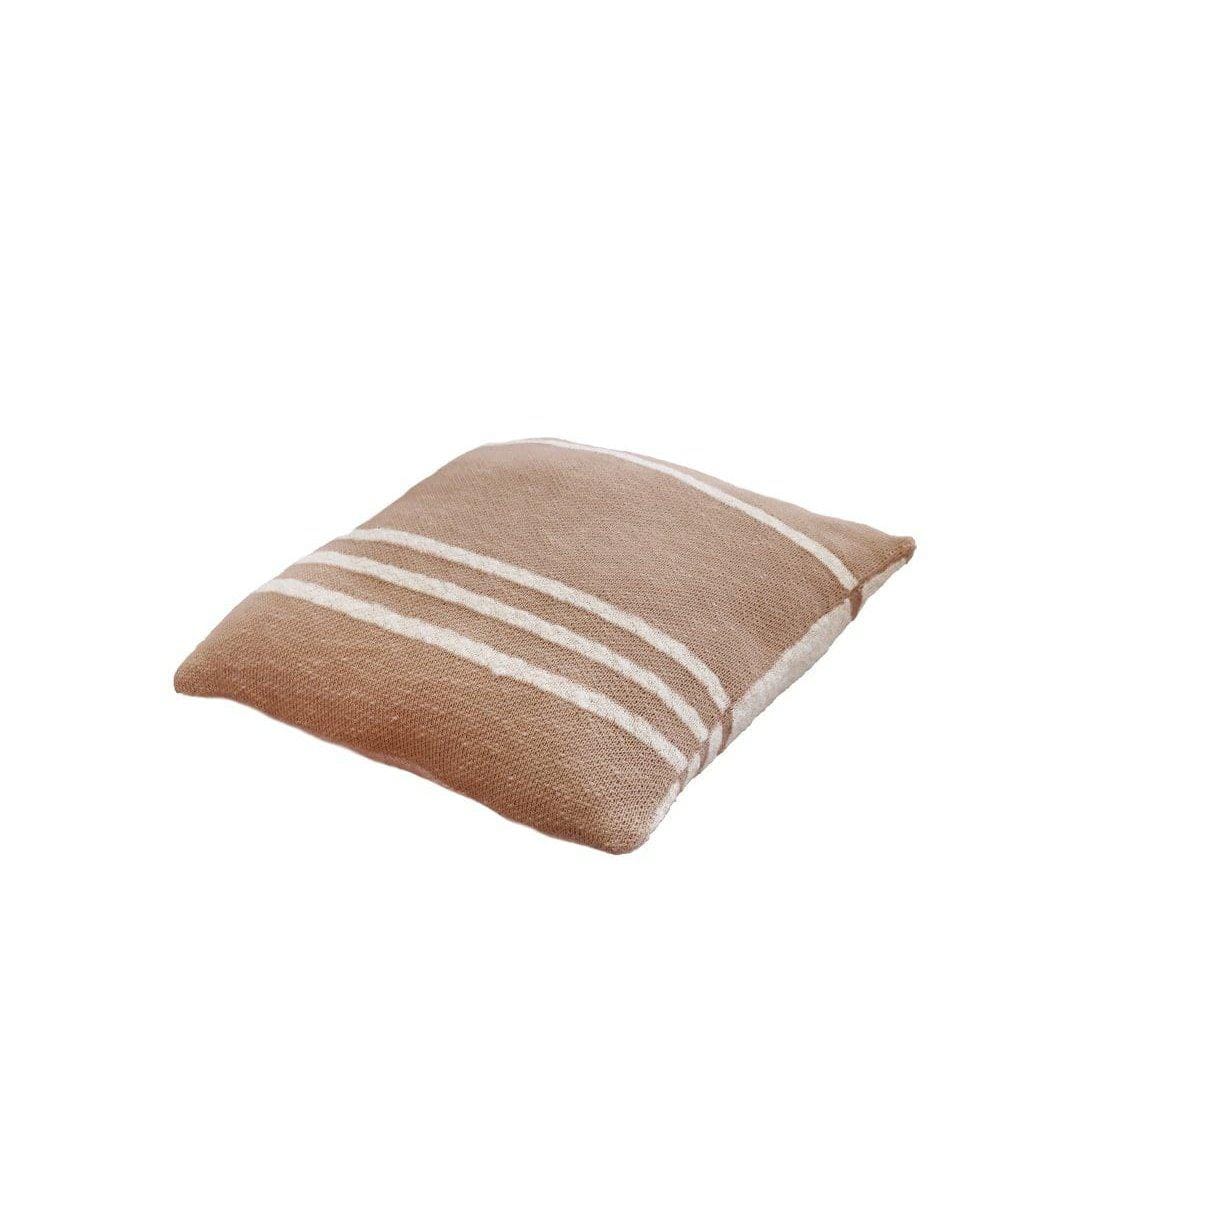 Rugs by Roo | Lorena Canals Duetto Powder Natural Knitted Cushion-SC-DUETTO-POW